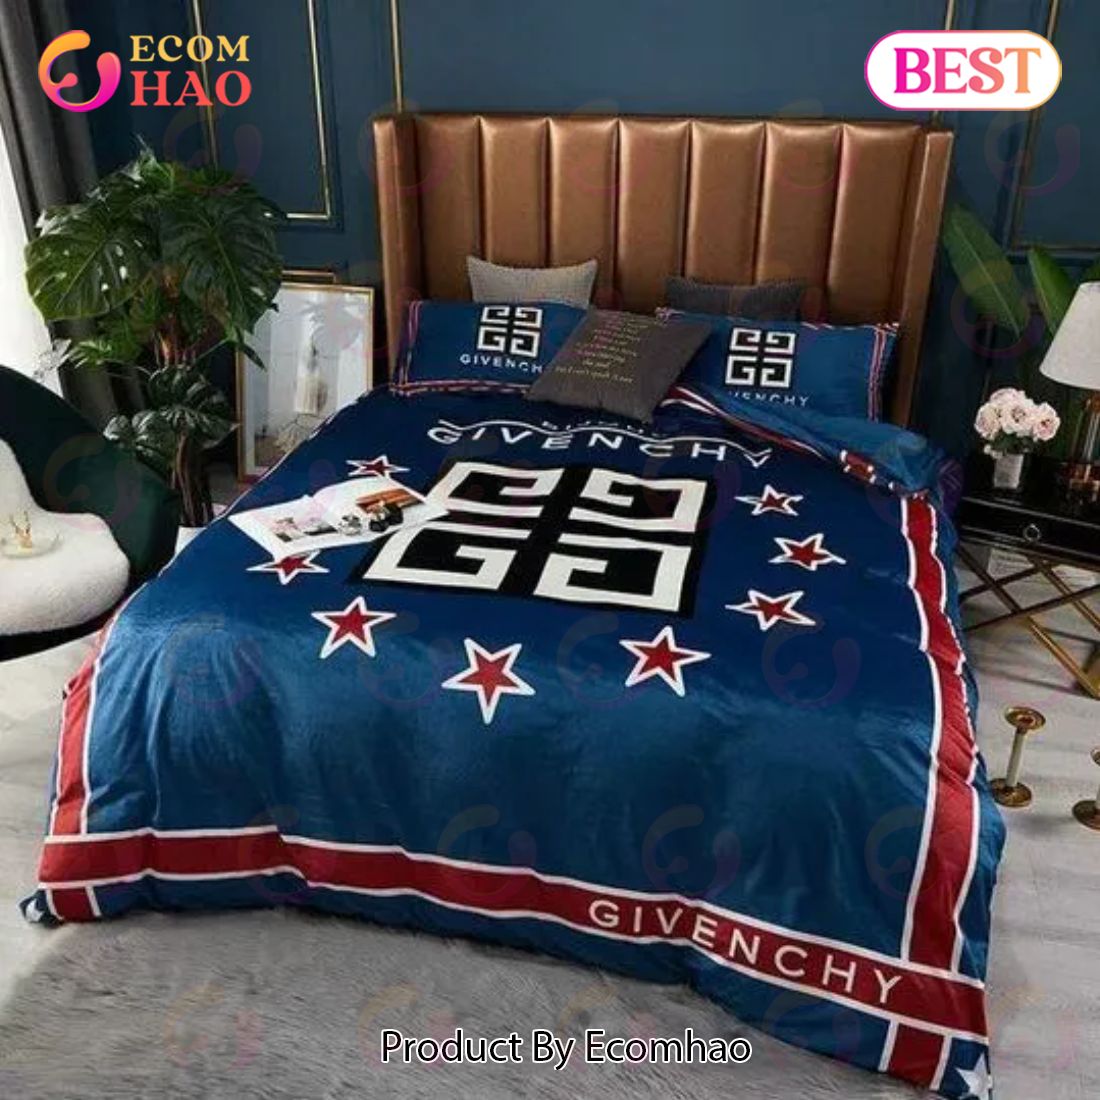 Blue Givenchy Logo Luxury Brand High End Premium Bedding Set For Bedroom Luxury Bedspread Duvet Cover Set With Pillowcases Home Decoration